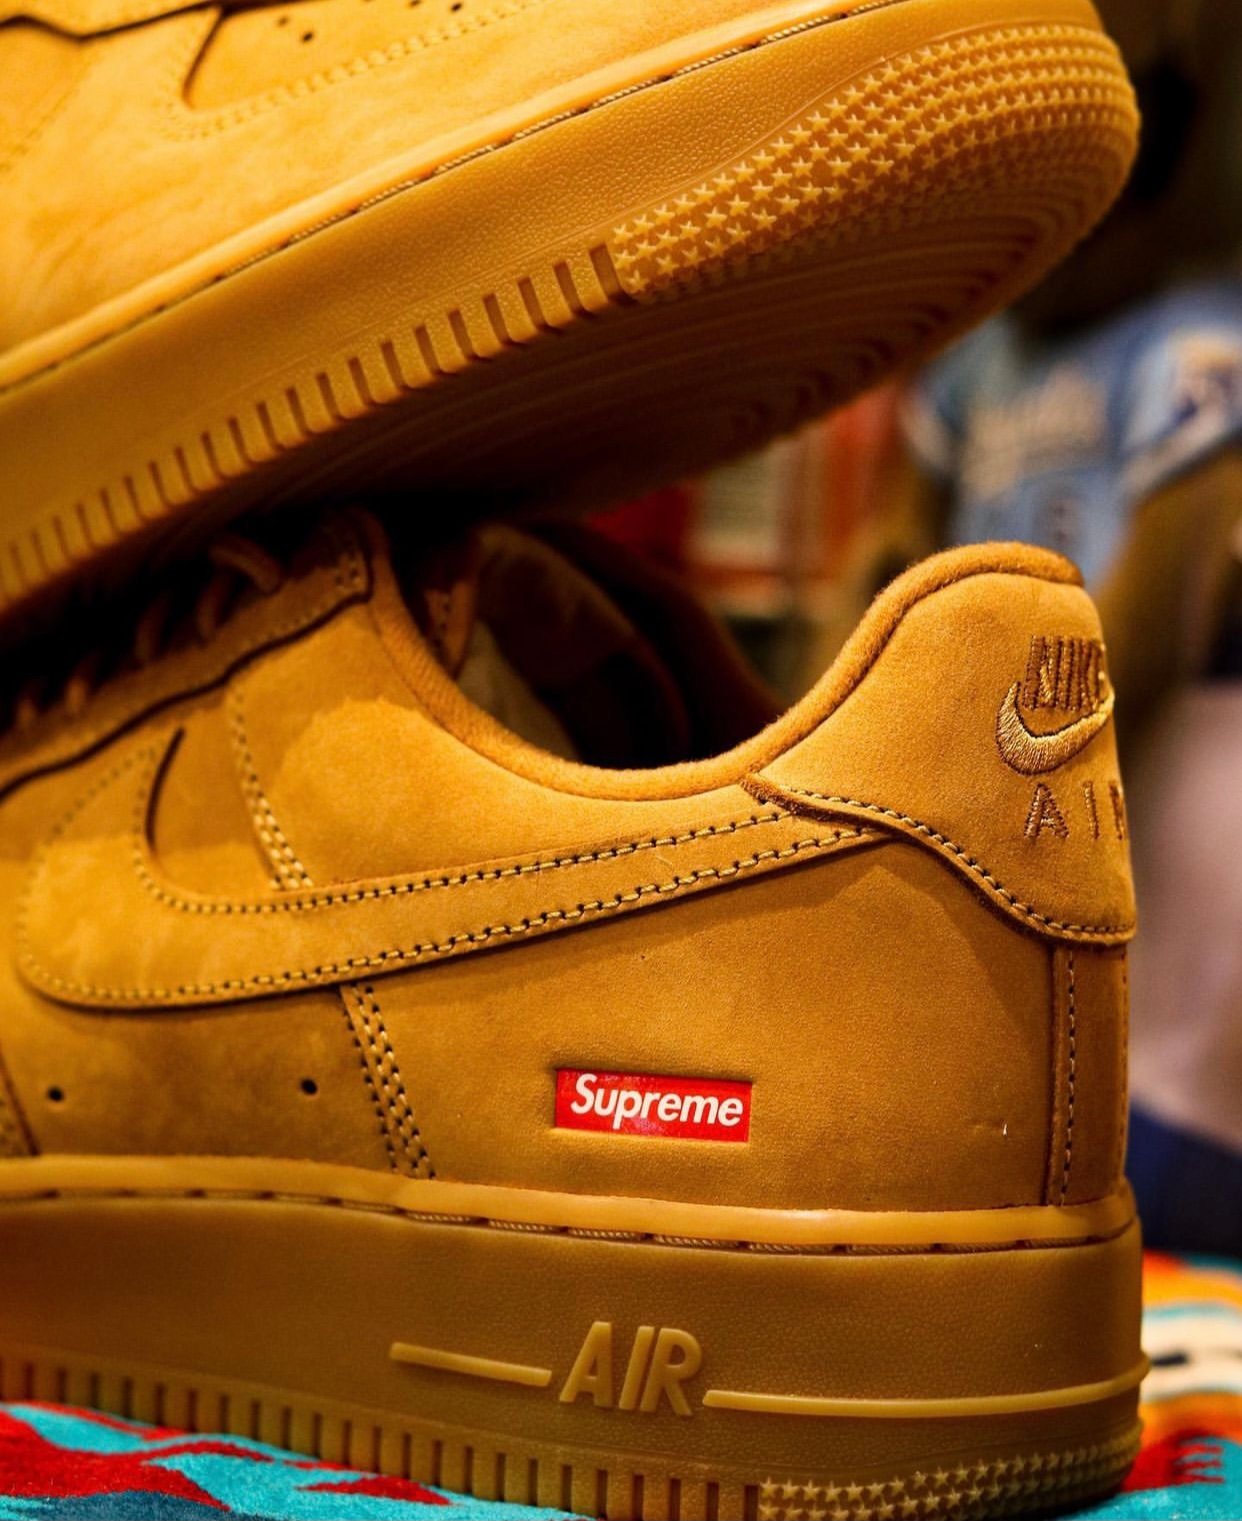 Supreme x Nike Air Force 1 Low Flax Wheat Release Date Info 